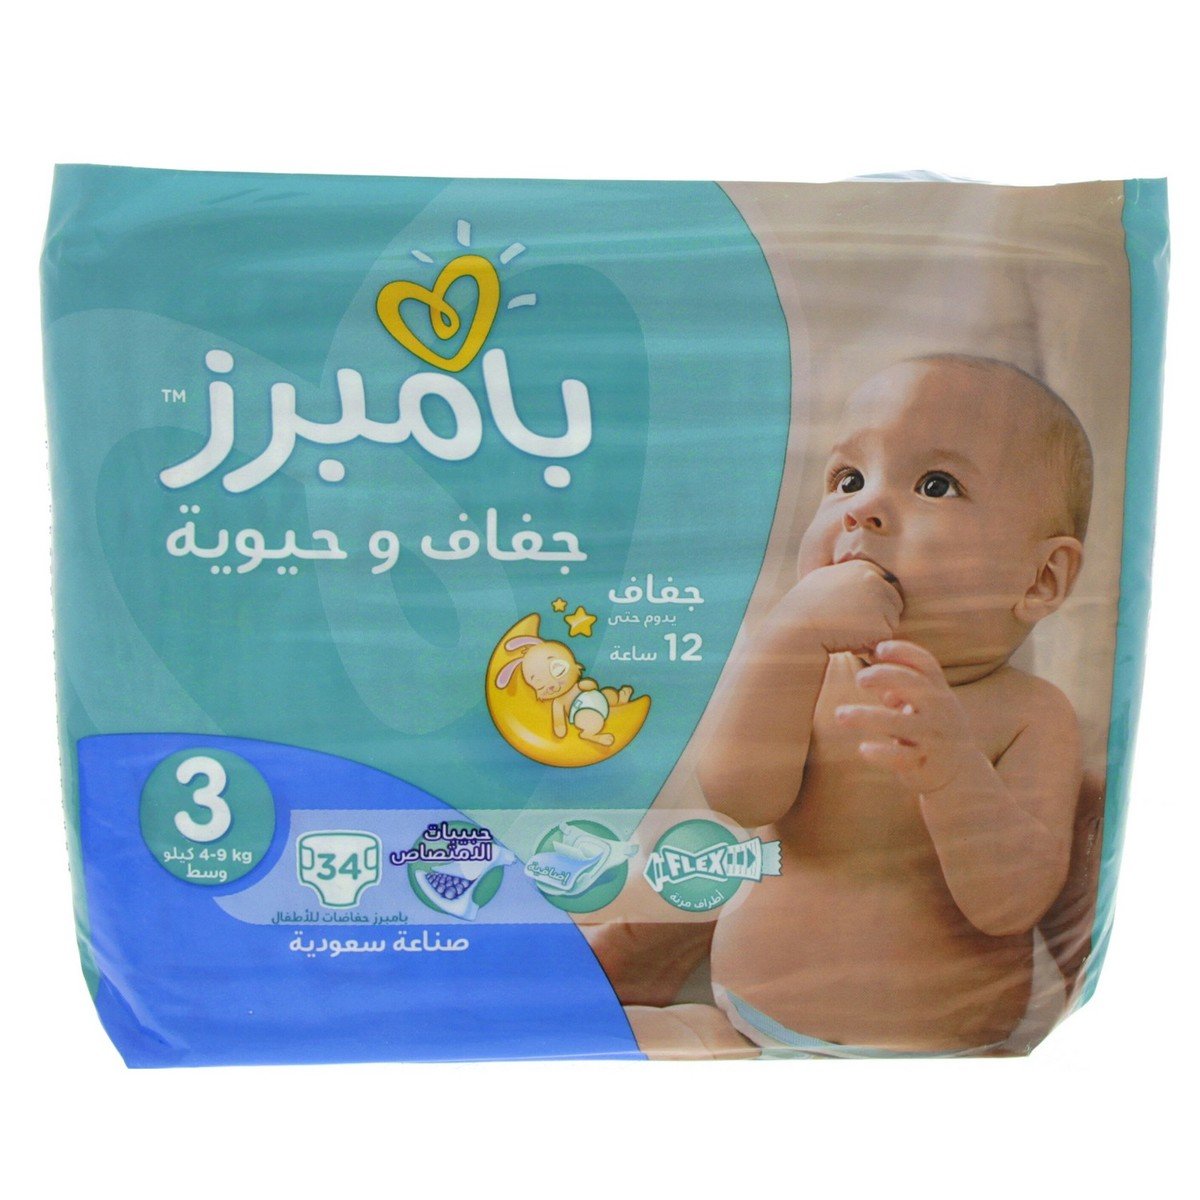 Pampers Active Baby-Dry, Size 3, Medium, 4-9kg 34pcs Count